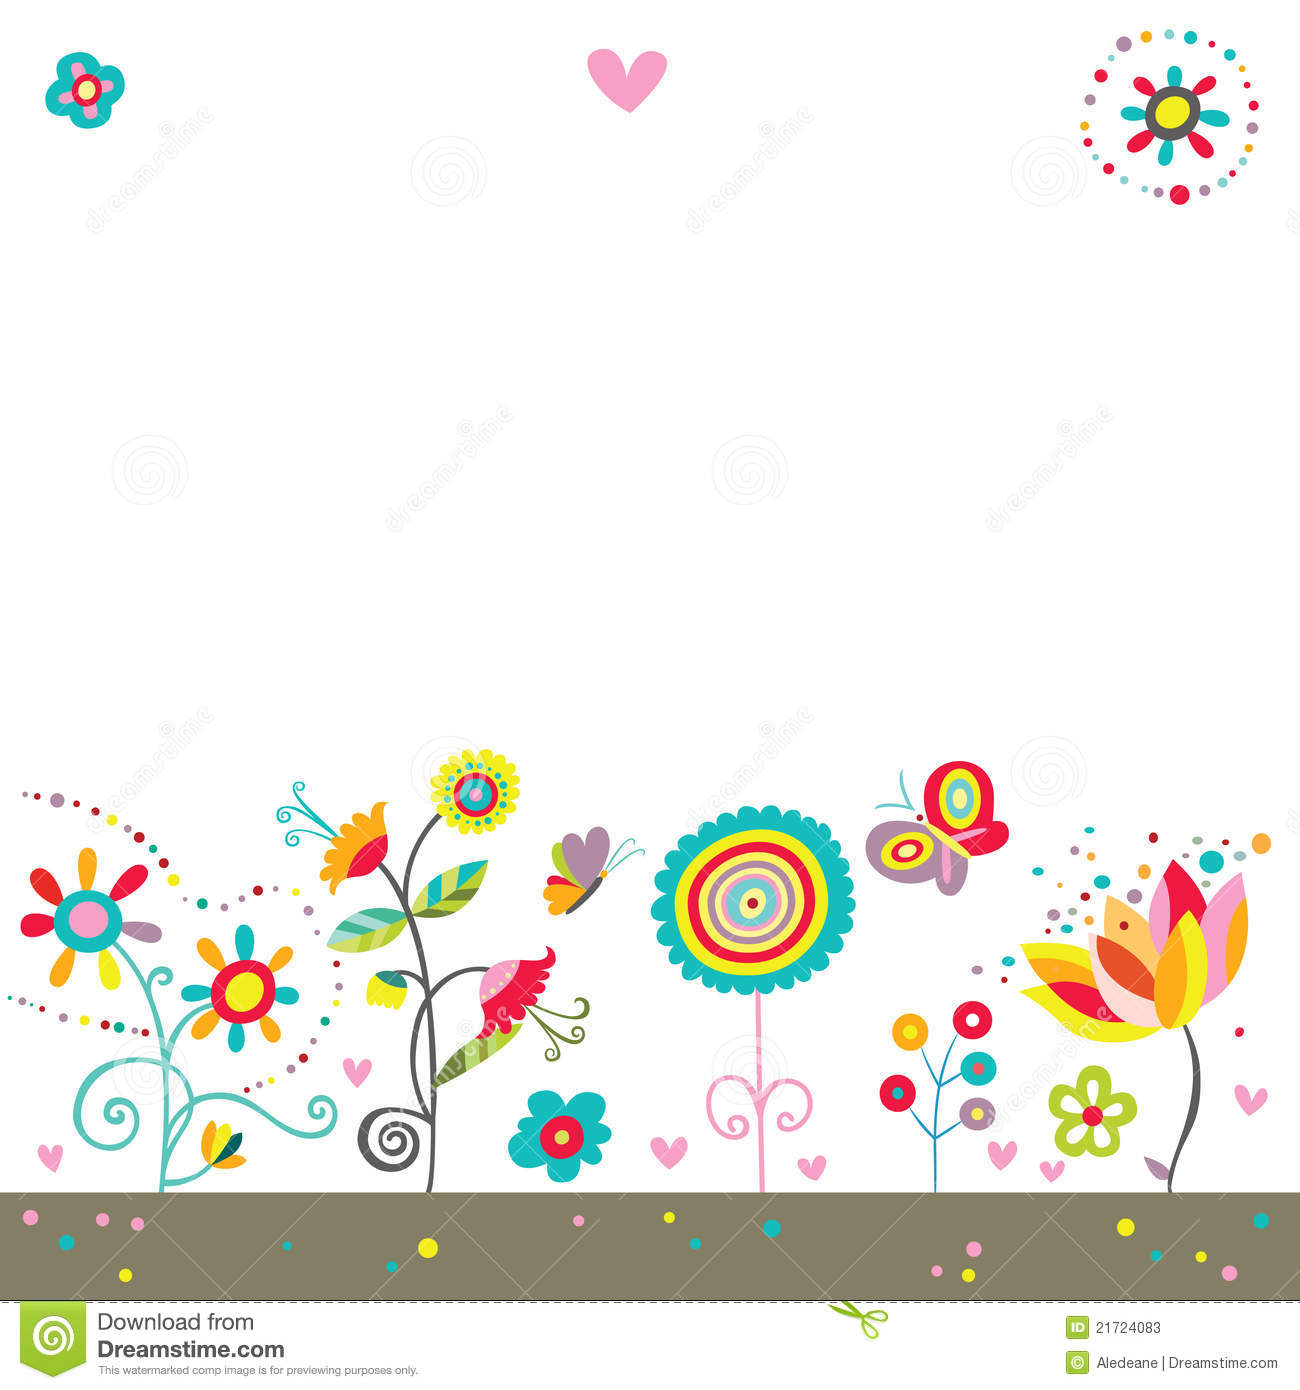 More Similar Stock Image Of Cute Colorful Background